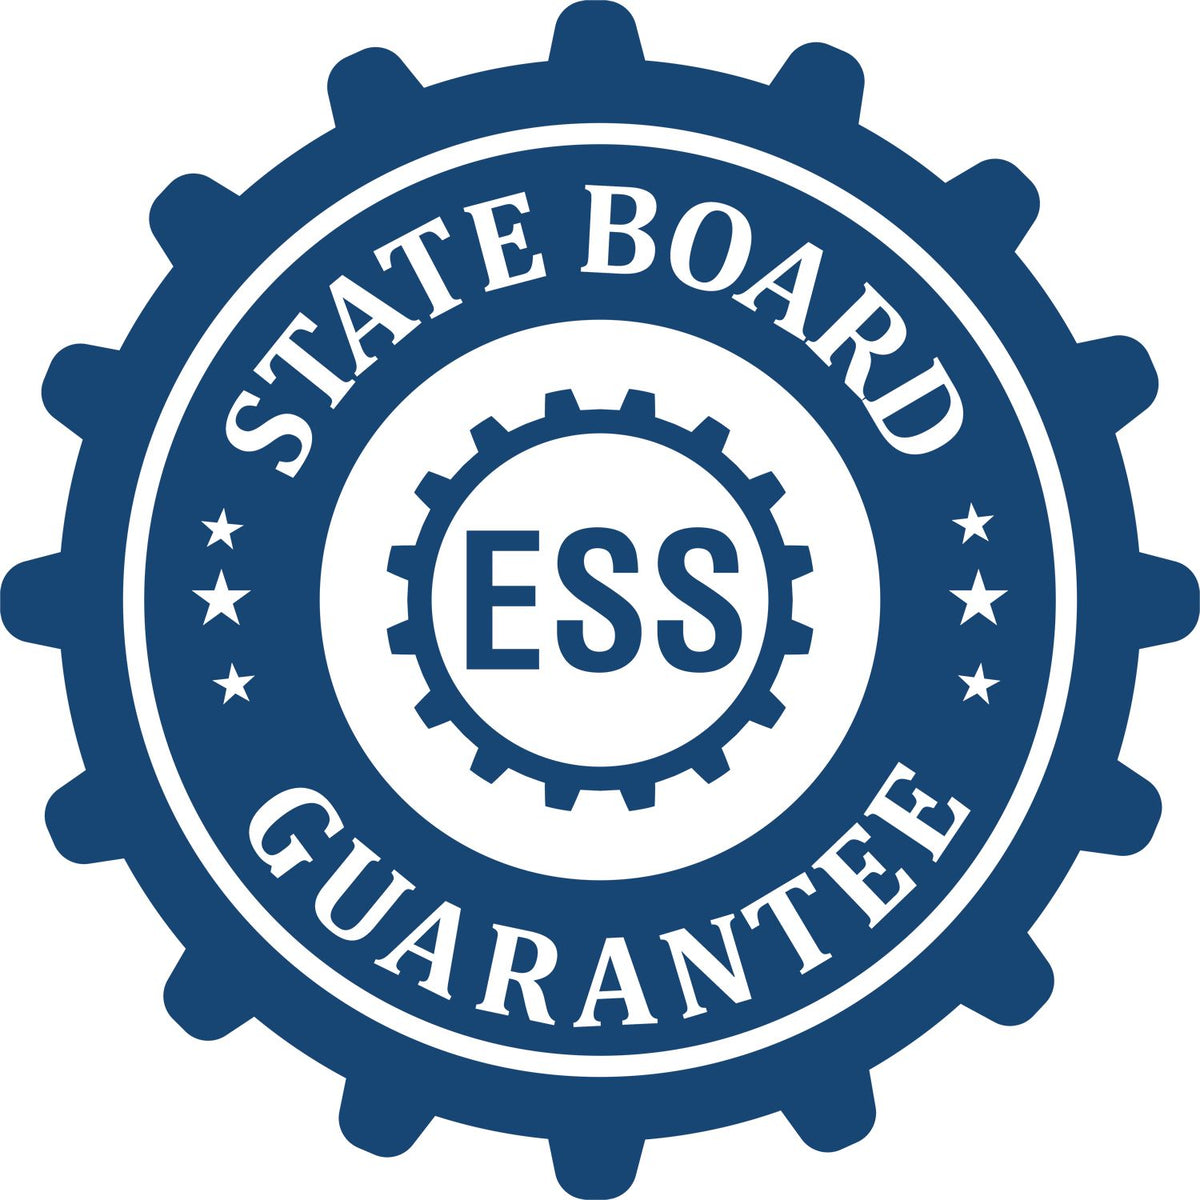 An emblem in a gear shape illustrating a state board guarantee for the Heavy-Duty Mississippi Rectangular Notary Stamp product.